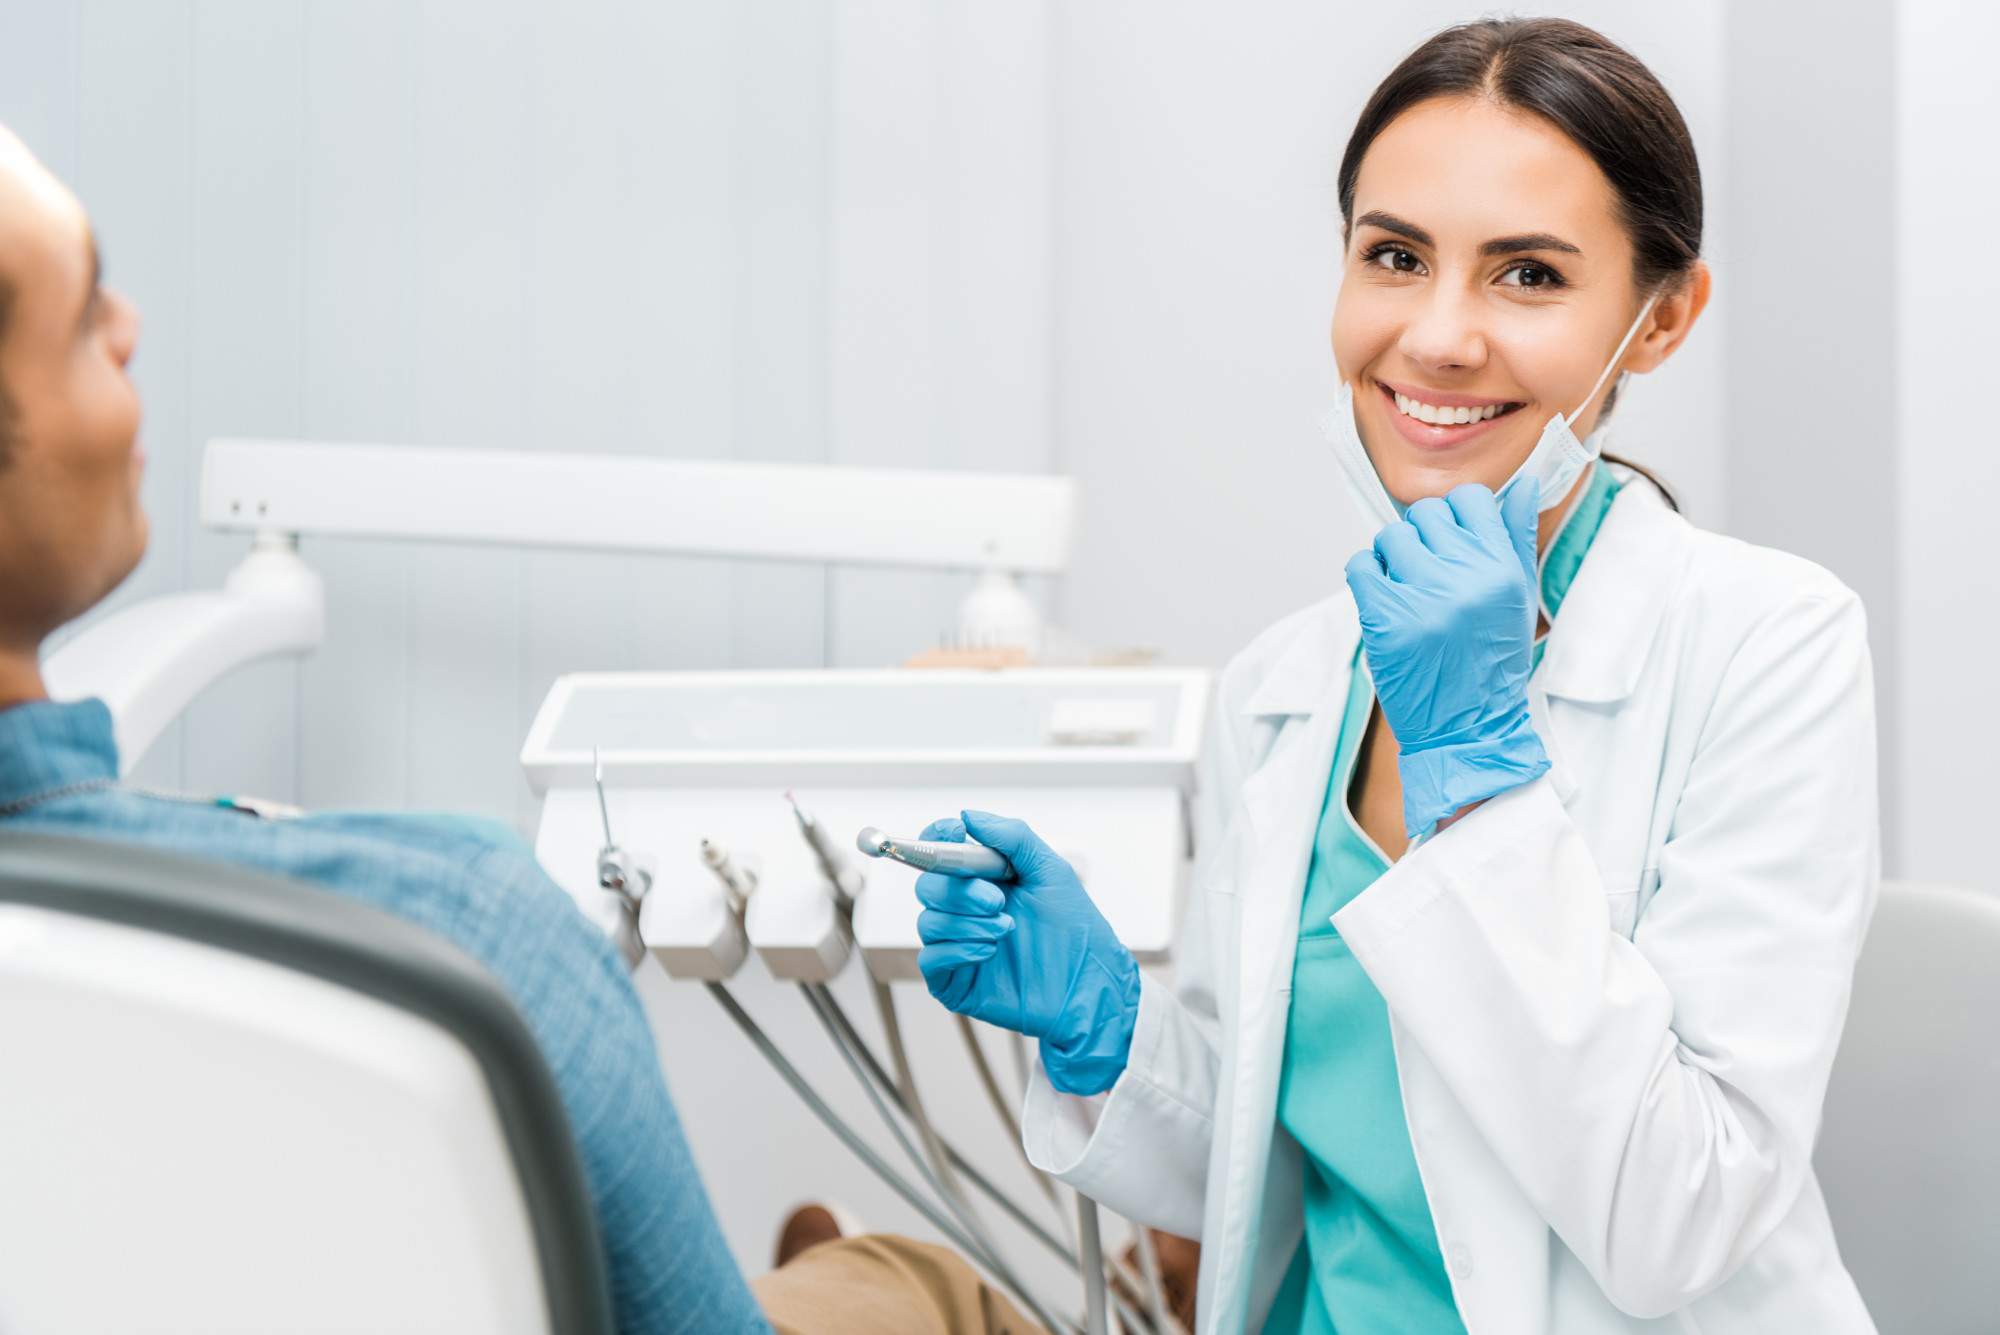 5 Qualities to Look for In a New Dentist